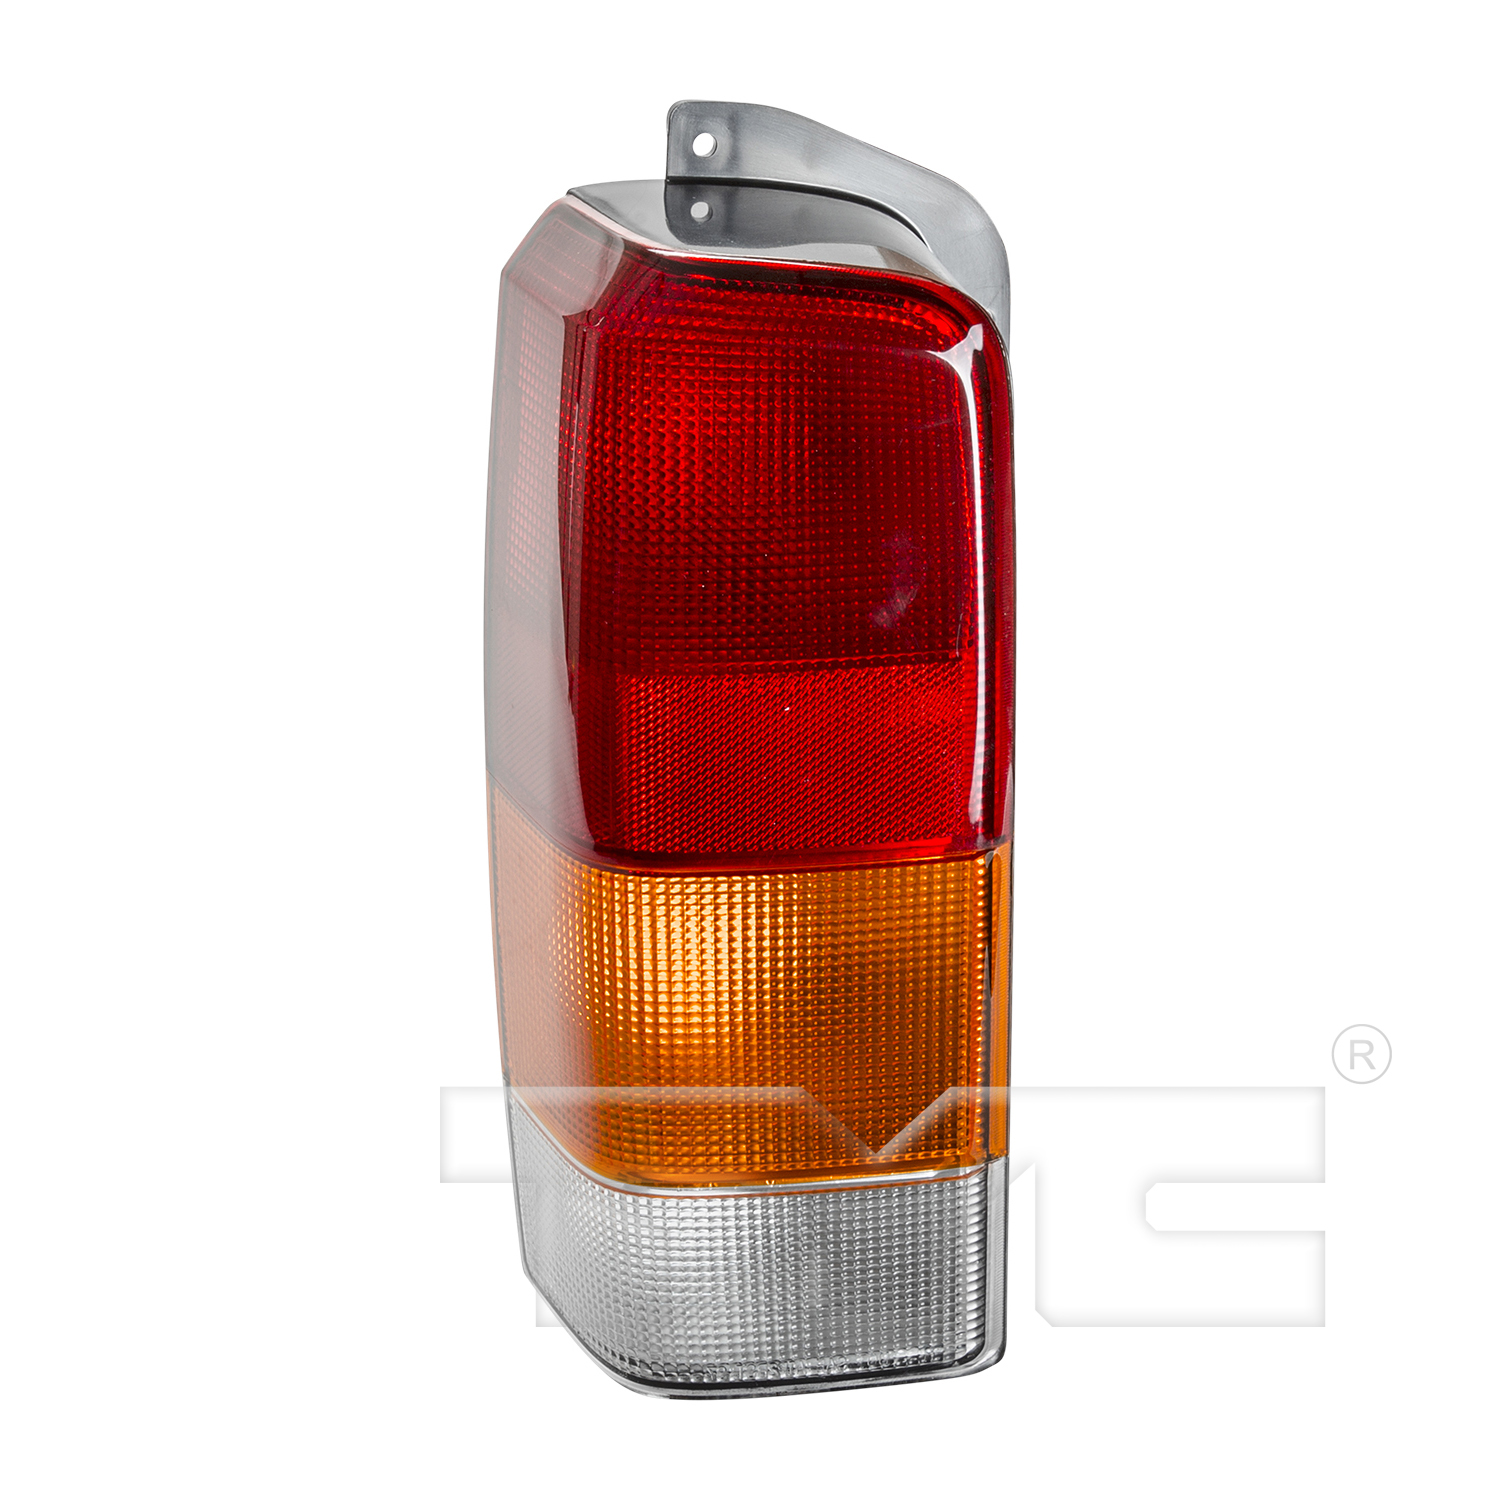 Aftermarket TAILLIGHTS for JEEP - CHEROKEE, CHEROKEE,97-01,LT Taillamp assy